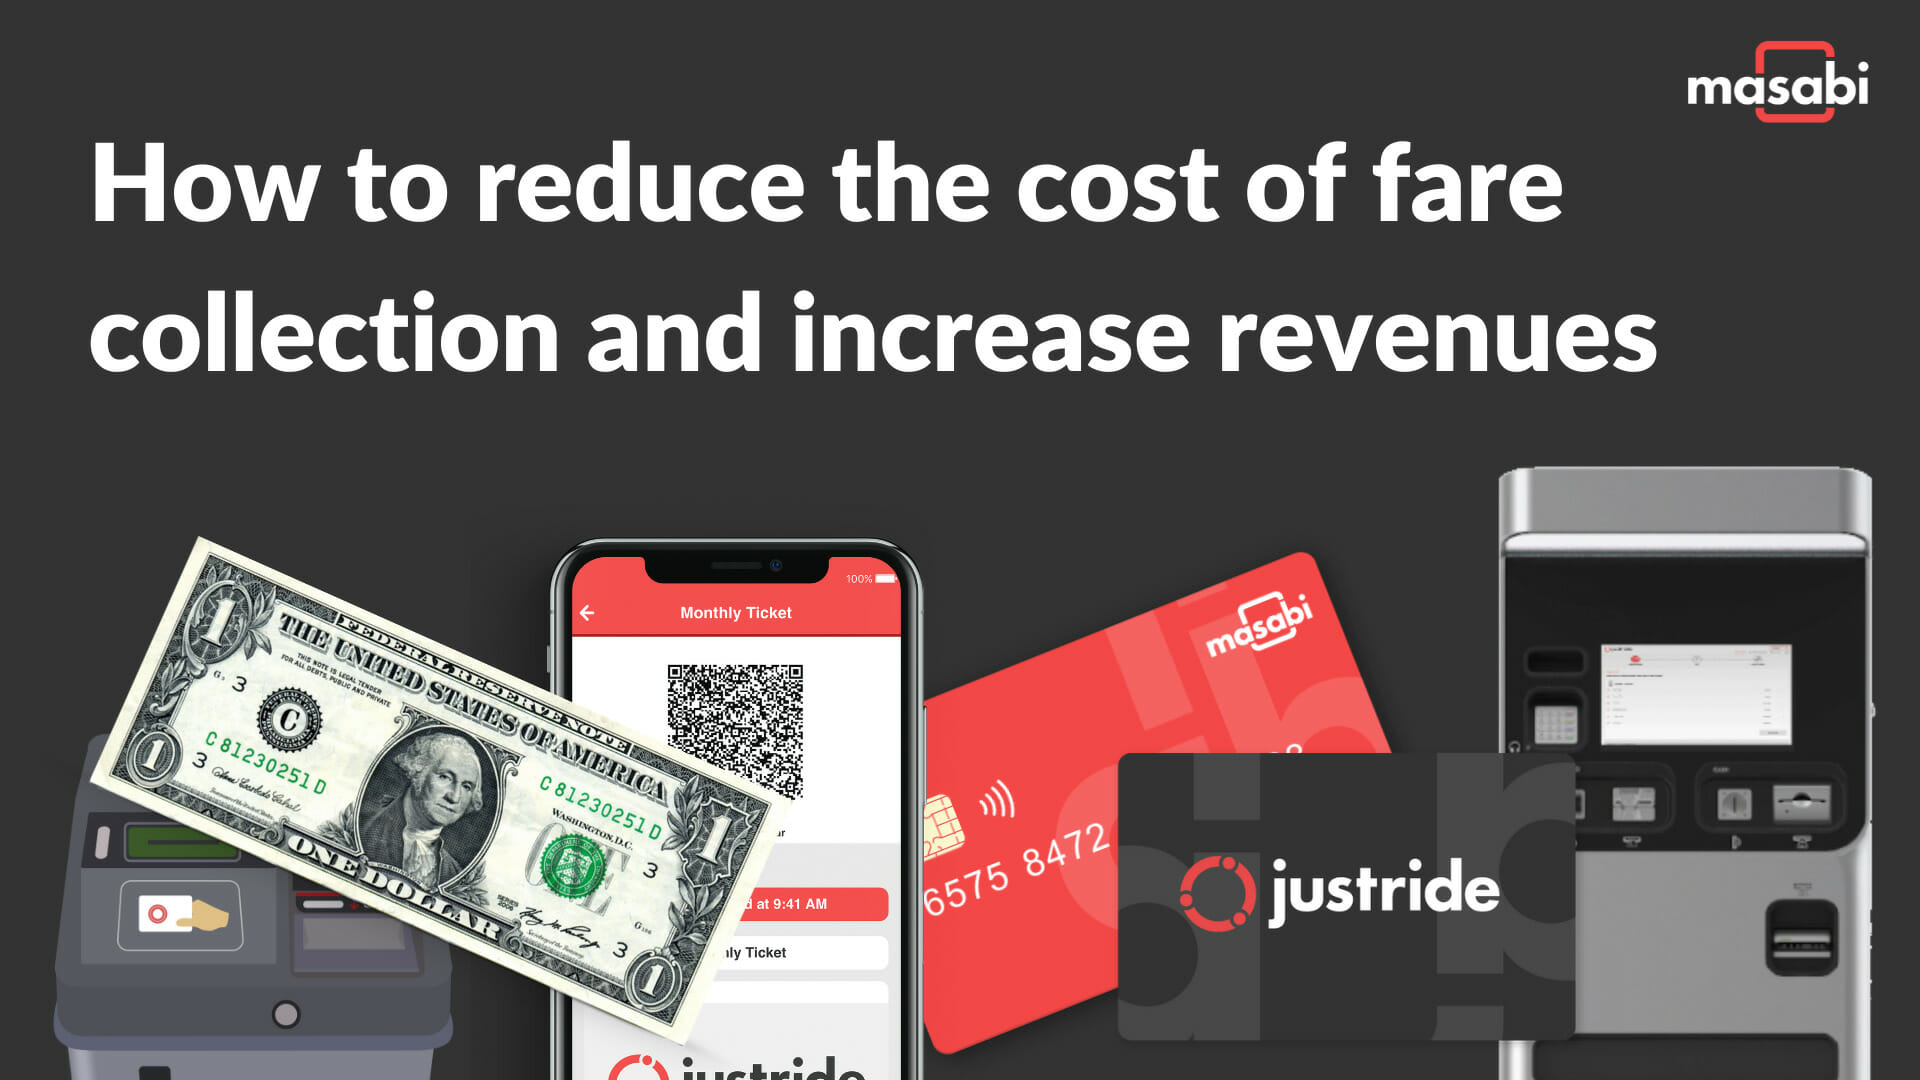 How to reduct the cost of fare collection